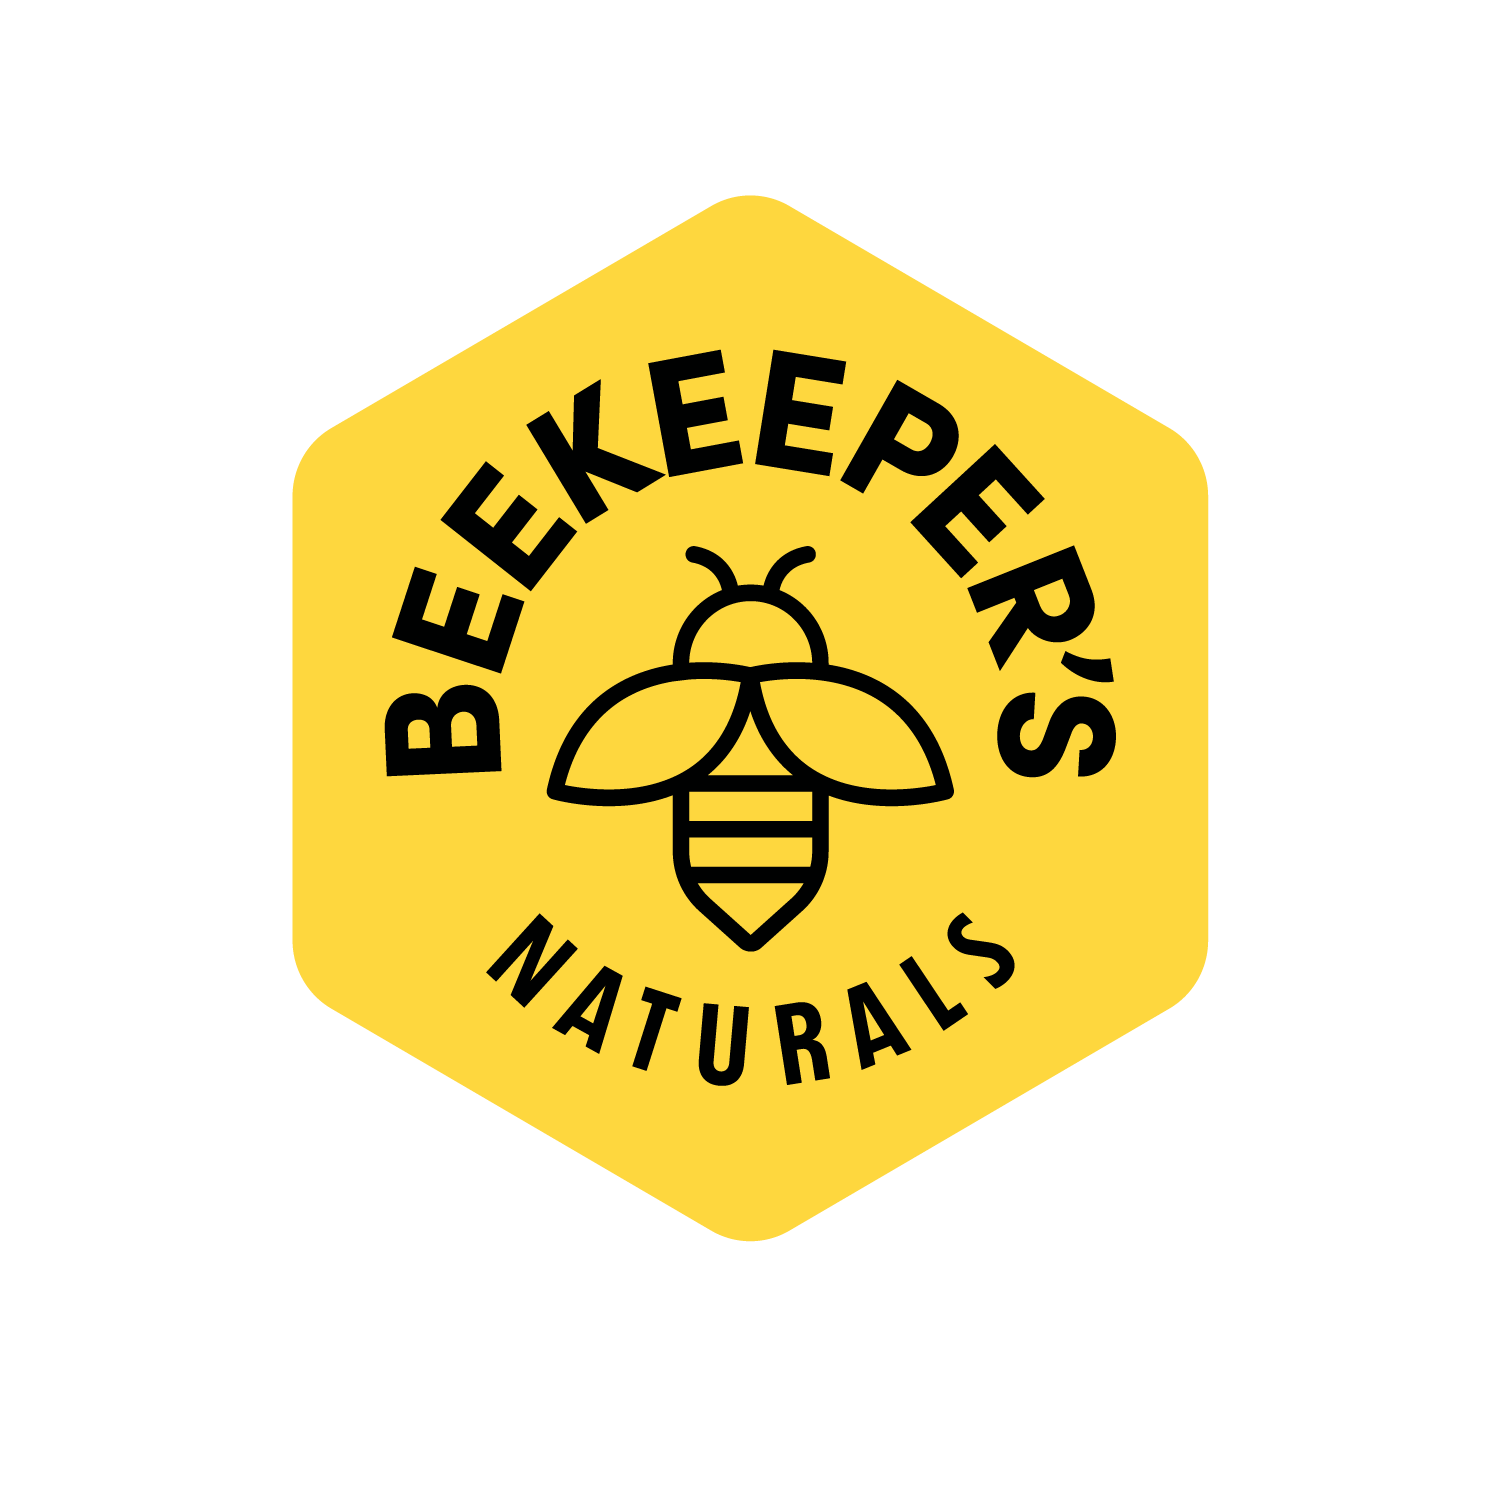 Beekeeper's Naturals: New look, same passion for nature + science